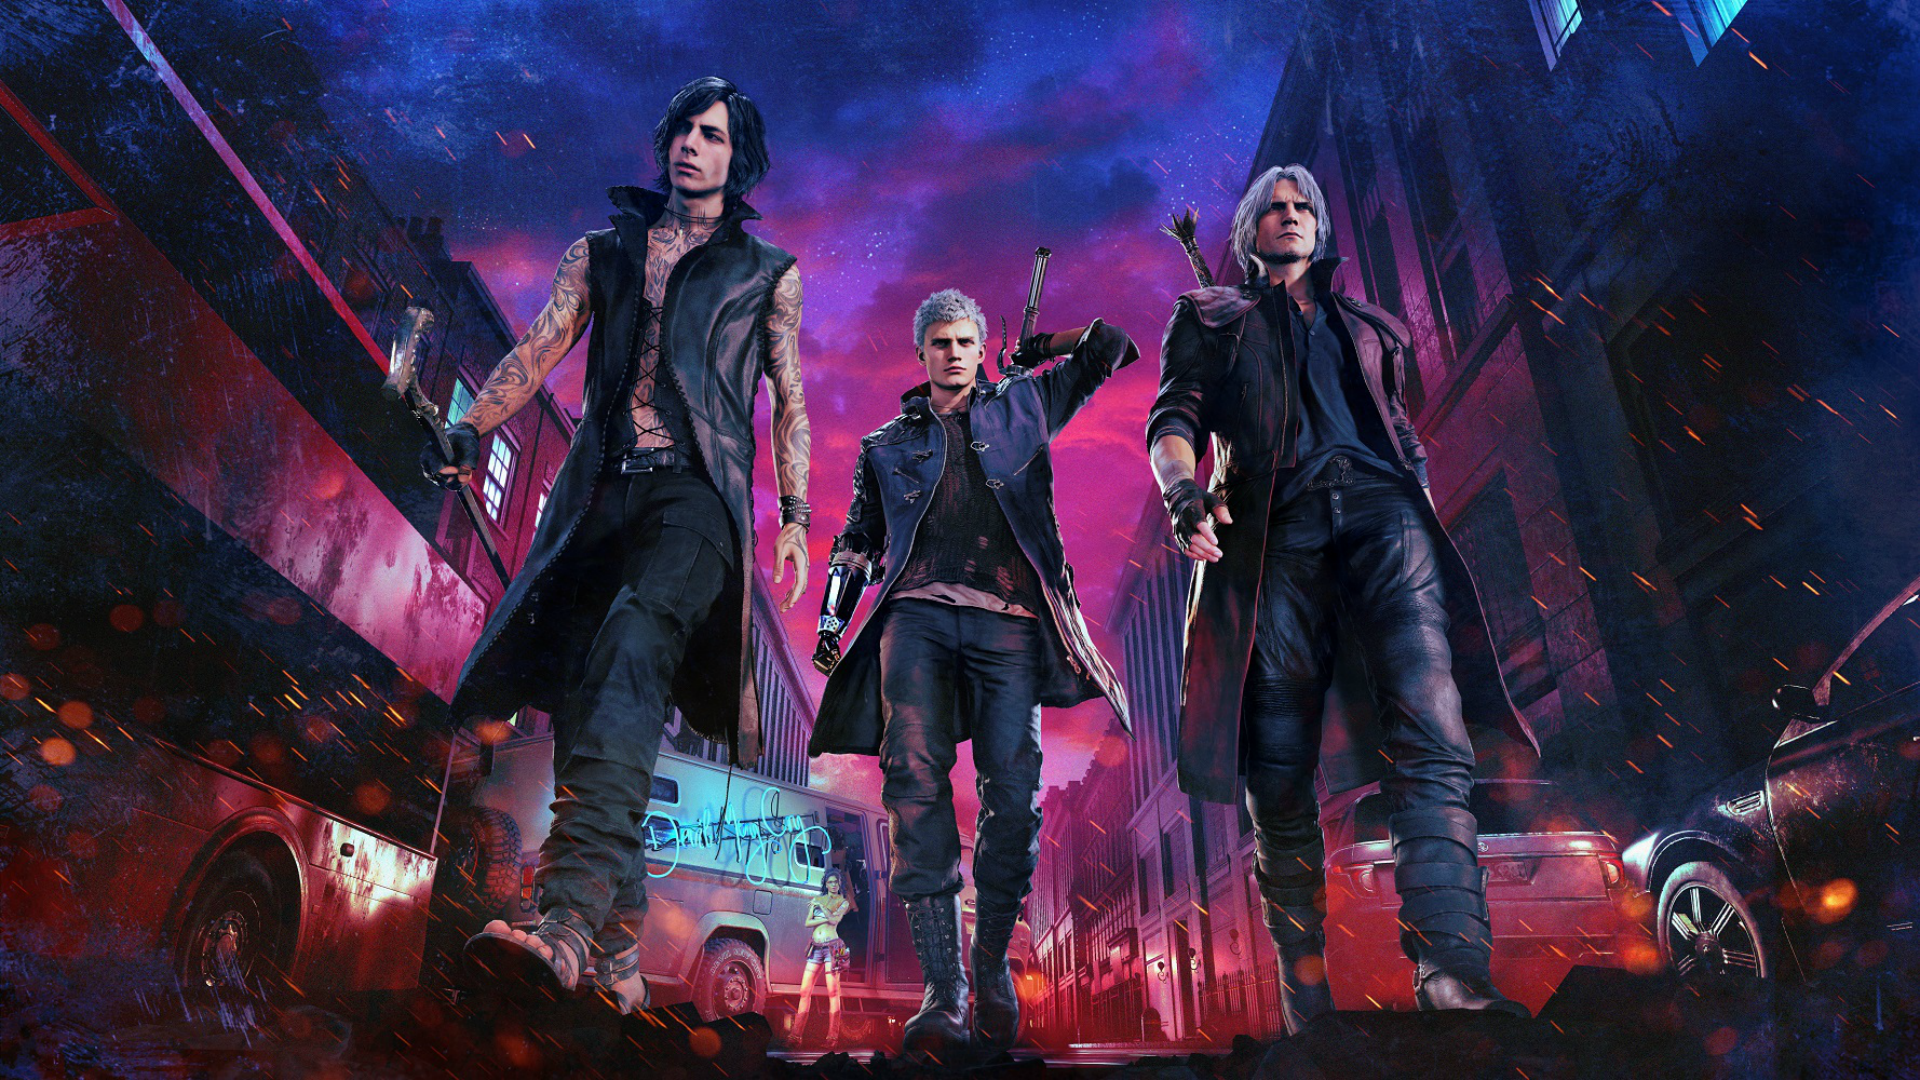 Devil May Cry Deluxe Edition Key Art HD Wallpaper Background